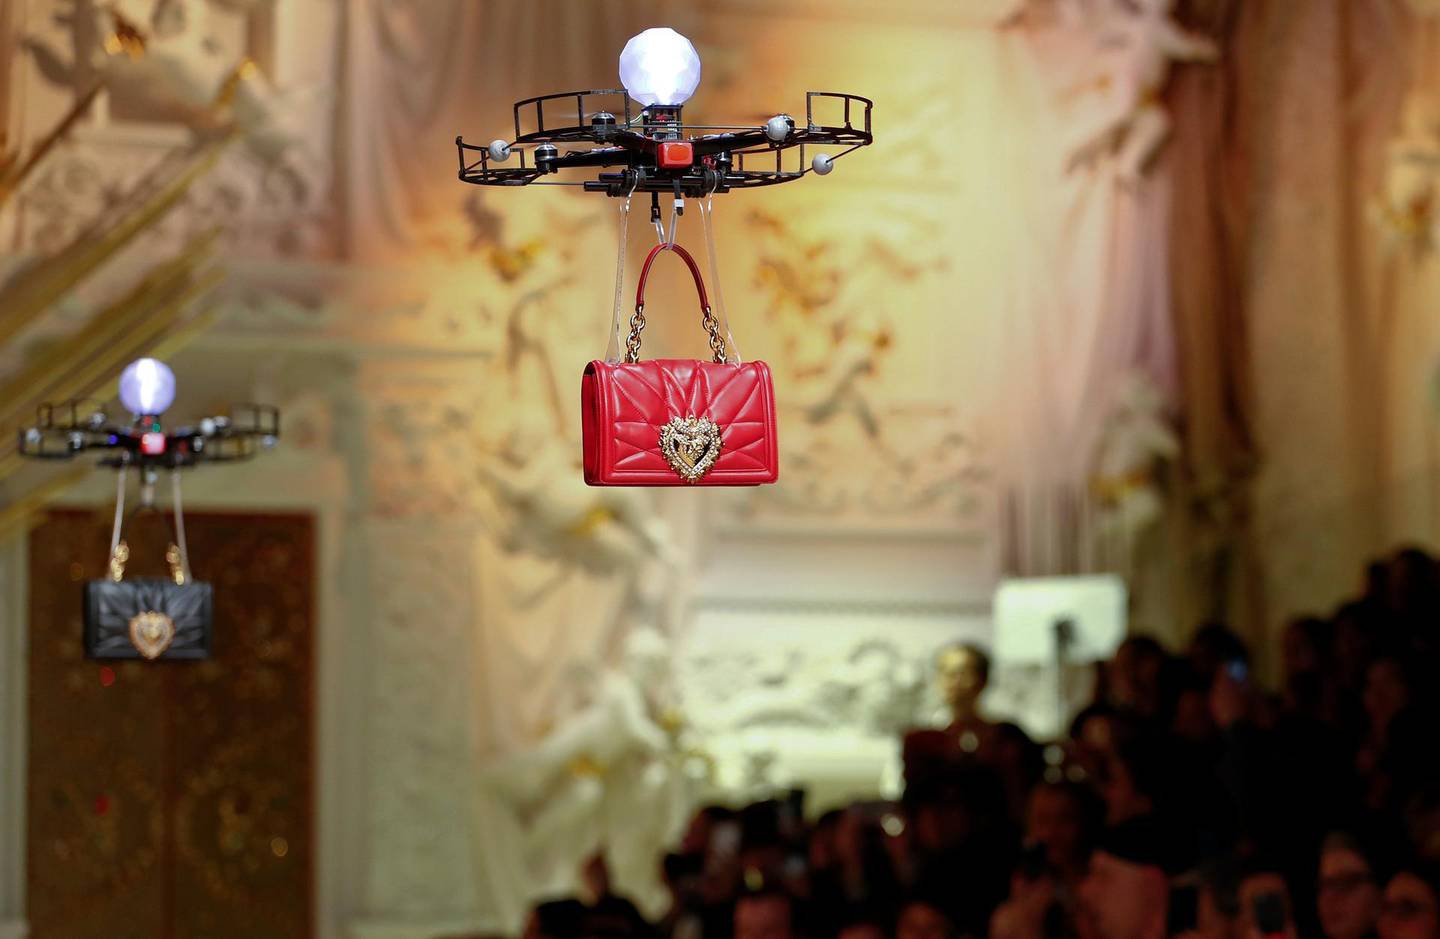 Drones carry bags, the creations from the Dolce & Gabbana Autumn/Winter 2018 women's collection during Milan Fashion Week in Milan, Italy February 25, 2018.  REUTERS/Alessandro Garofalo